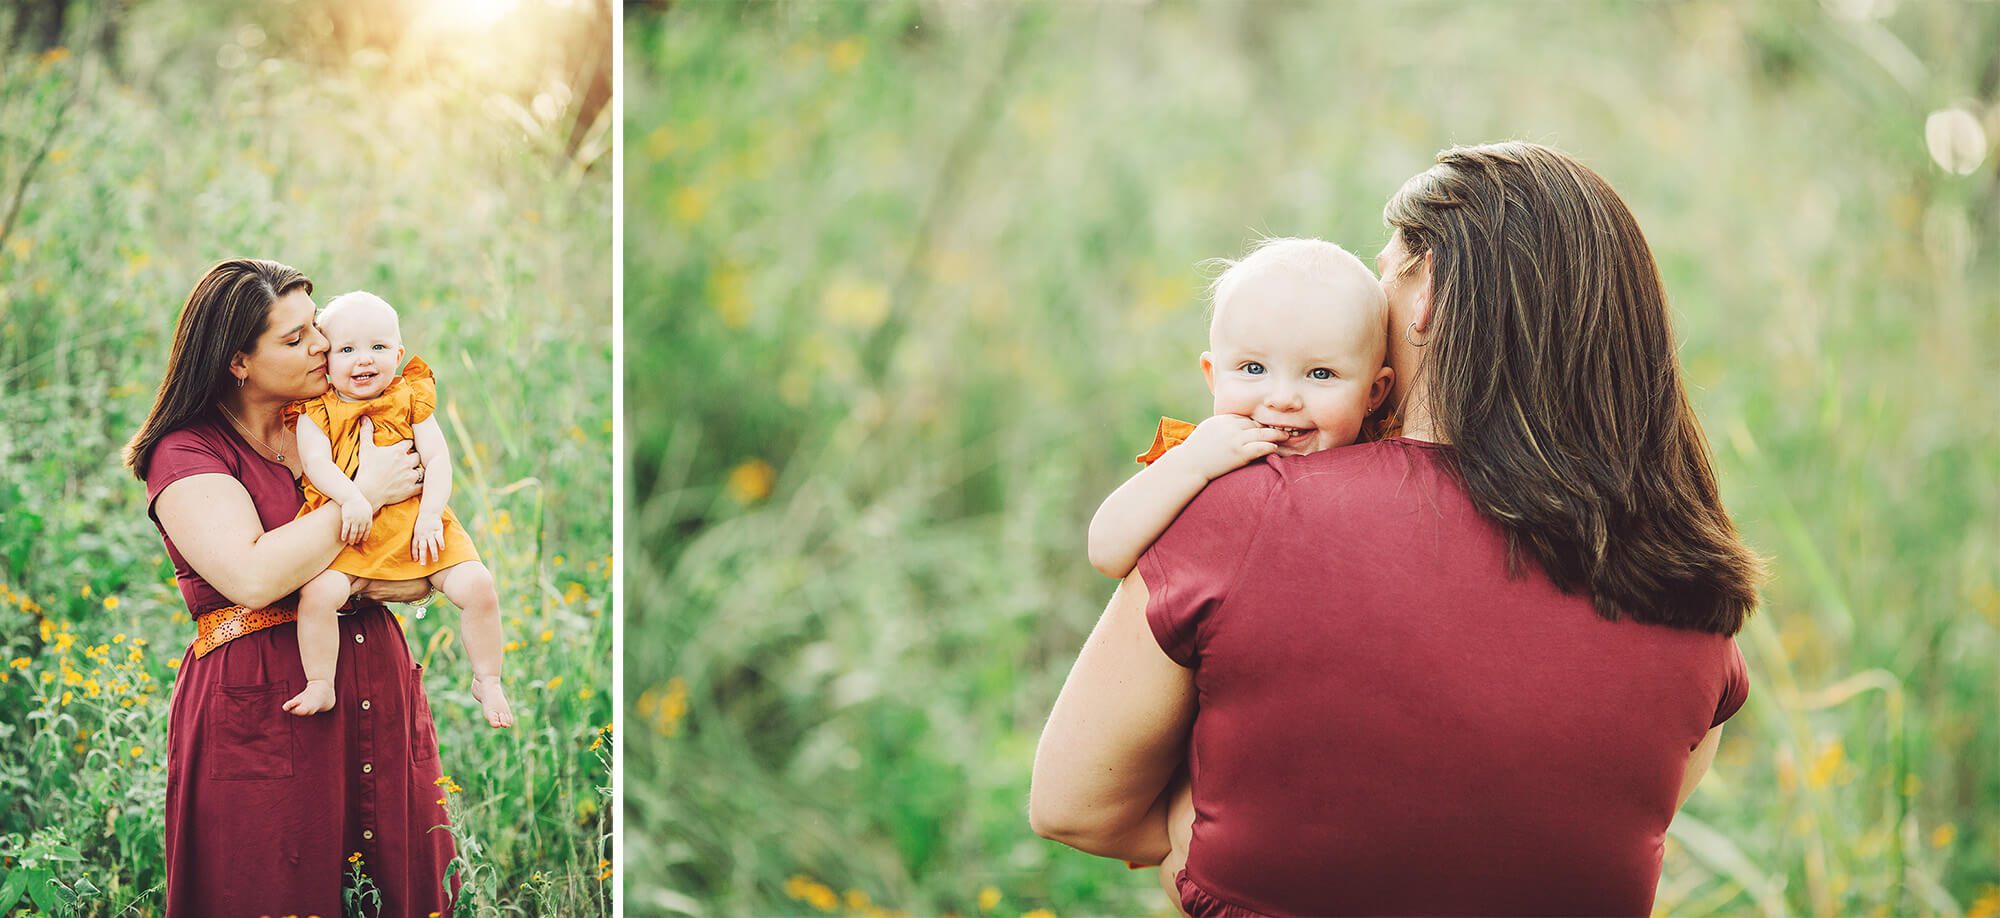 The sweet love between mom and daughter during the Tawney's family photo session.